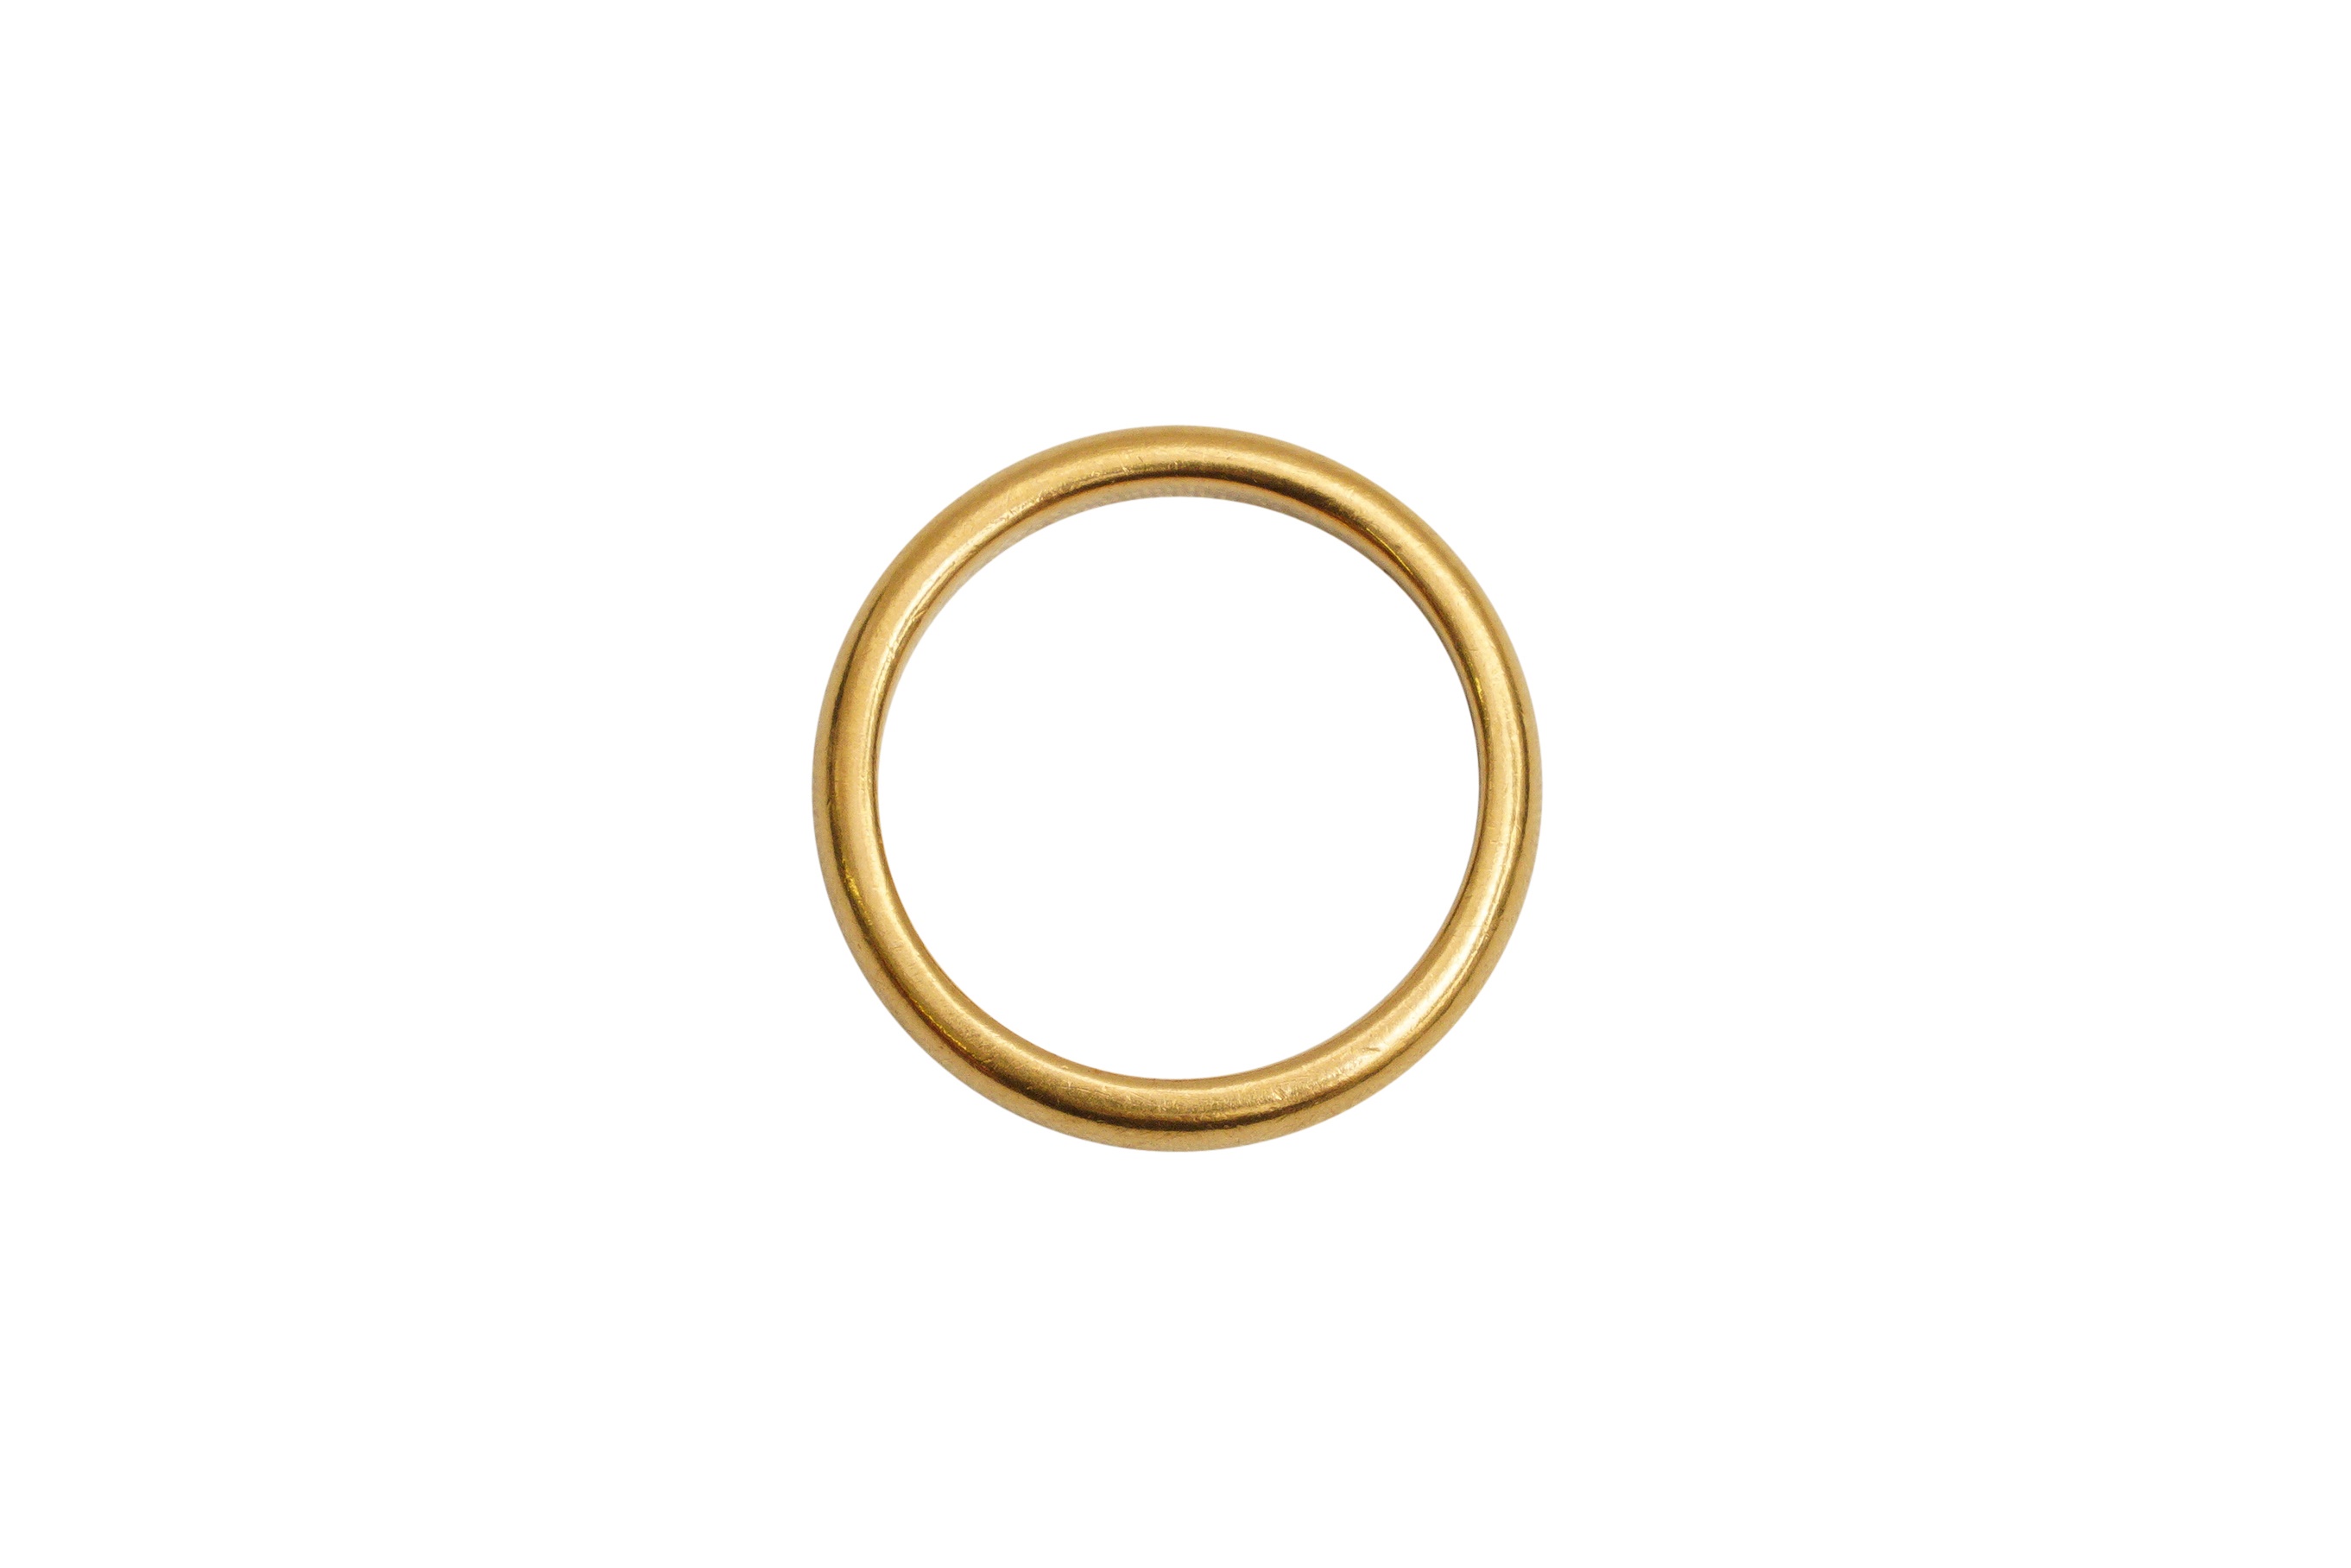 A 22CT GOLD WEDDING BAND - Image 2 of 2